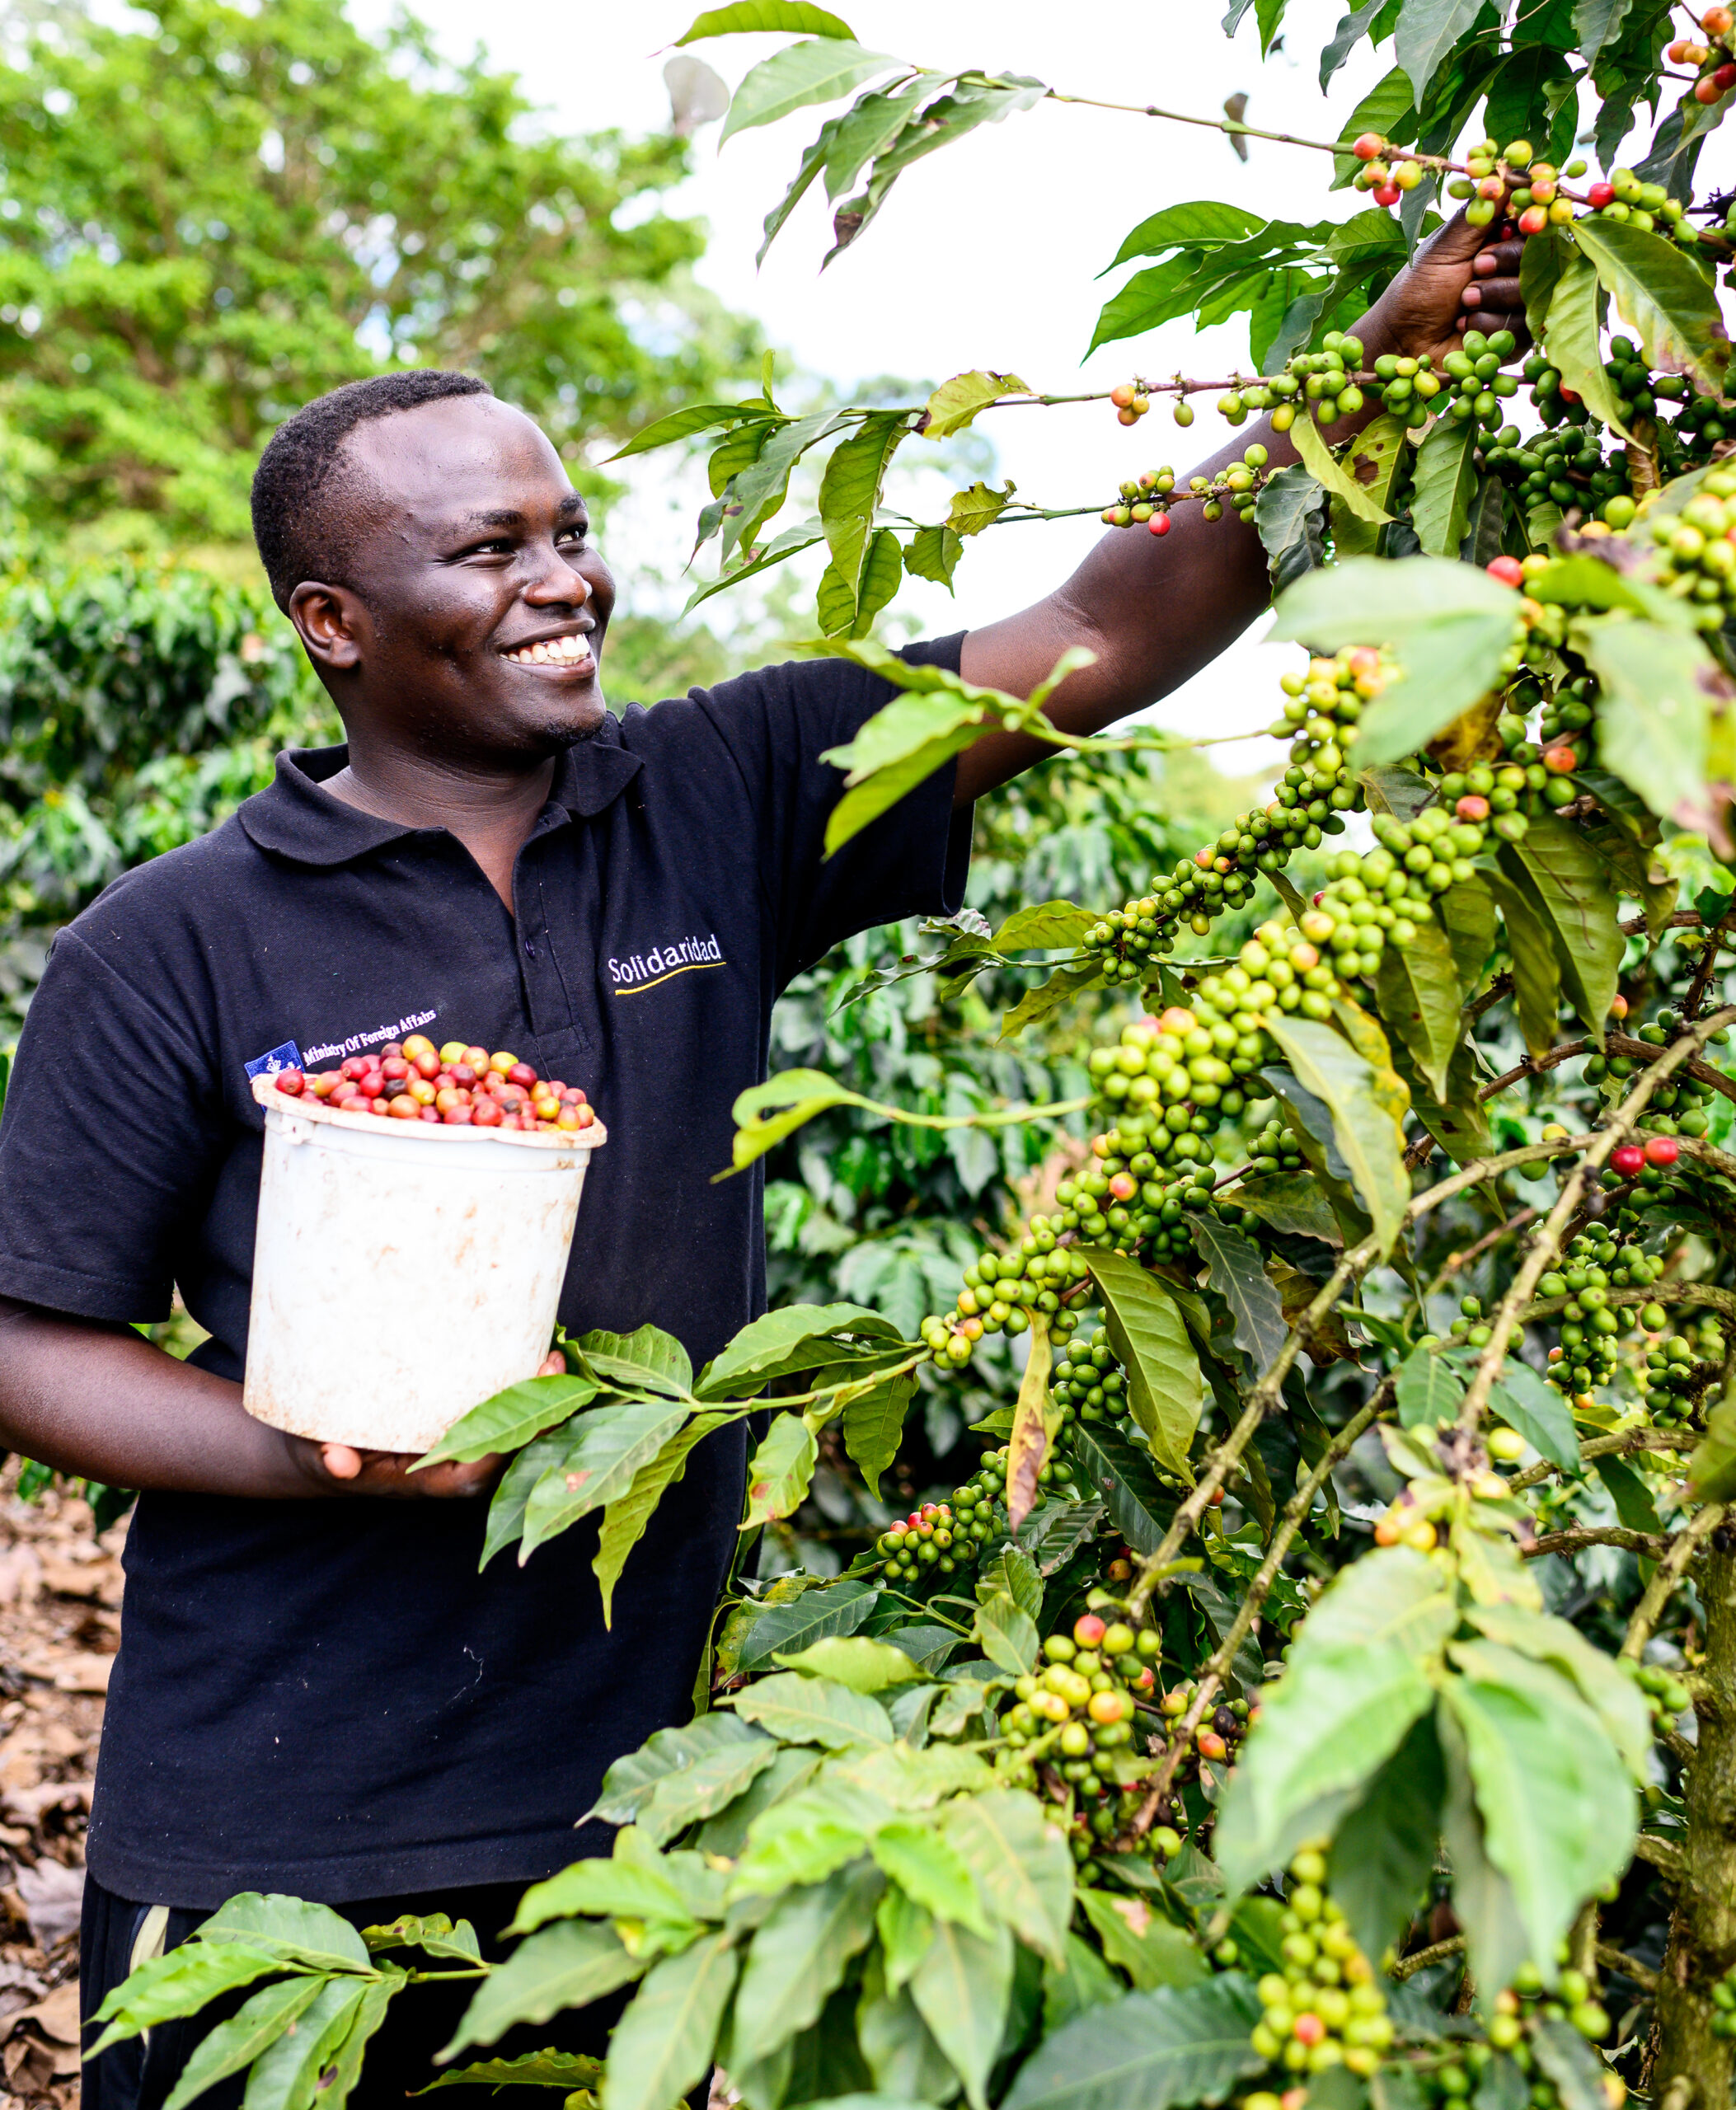 Highlight 1_ Coffee, tea, and food products farmers - Murei a youth coffee farmer picking coffee cherries in his fathers farm